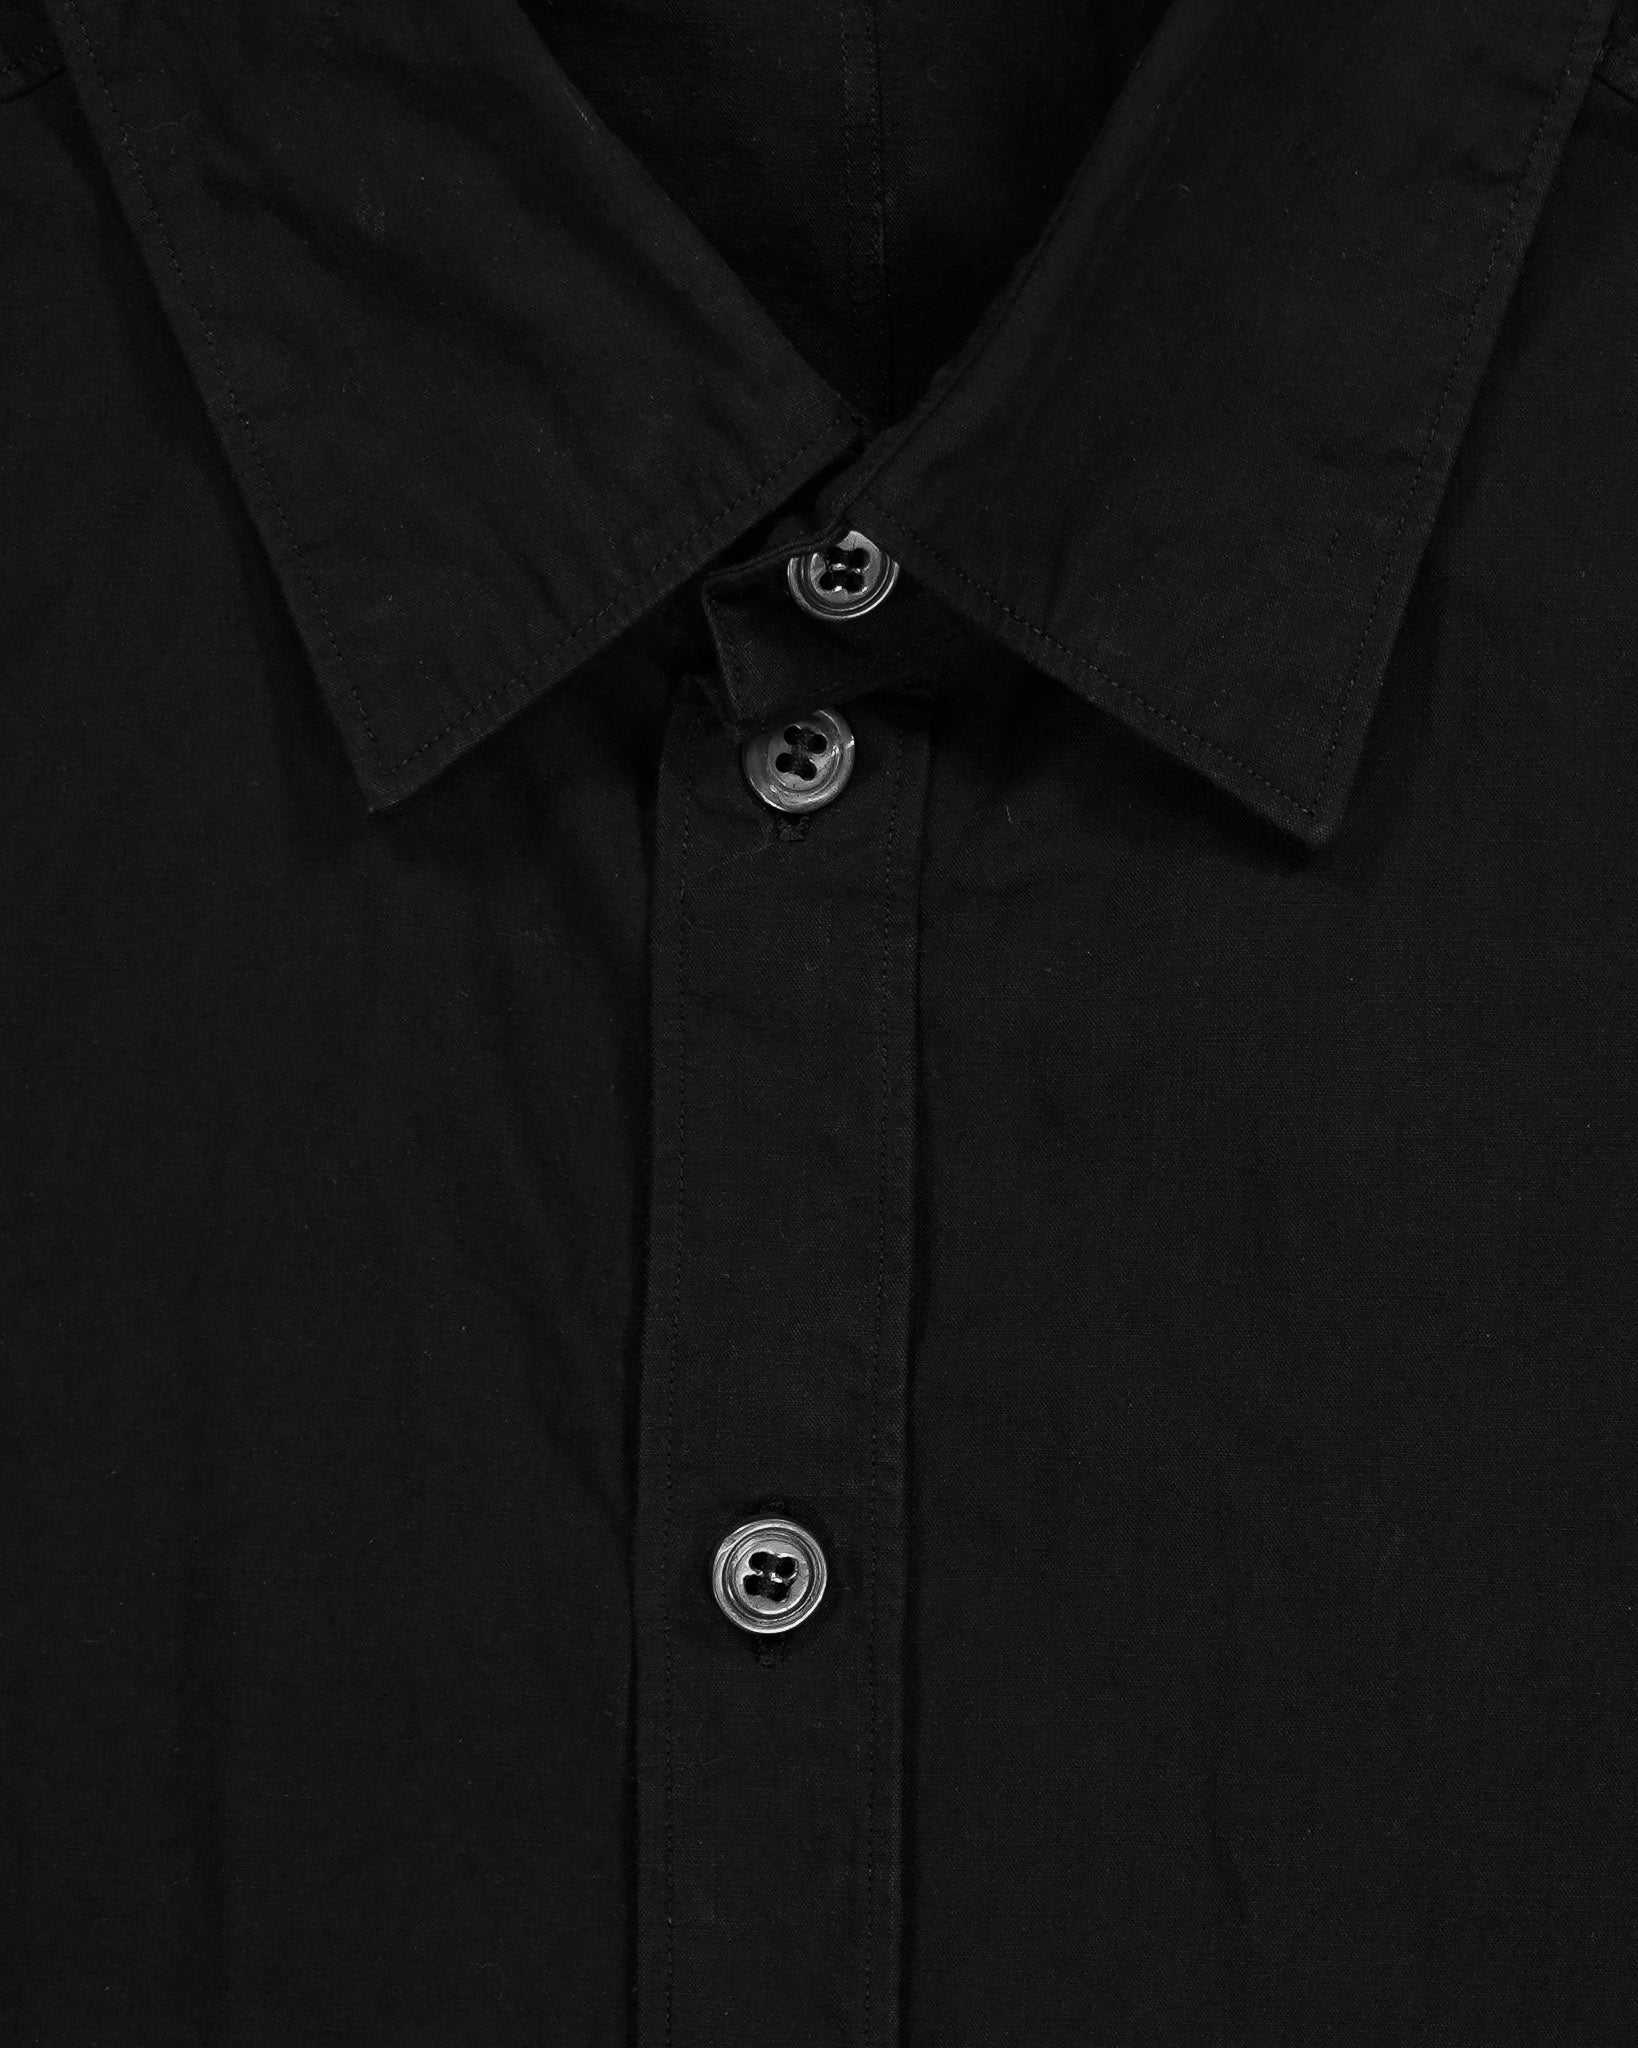 Carol Christian Poell Articulated Elbow Button Up Shirt - SS08 "Off-Scene"